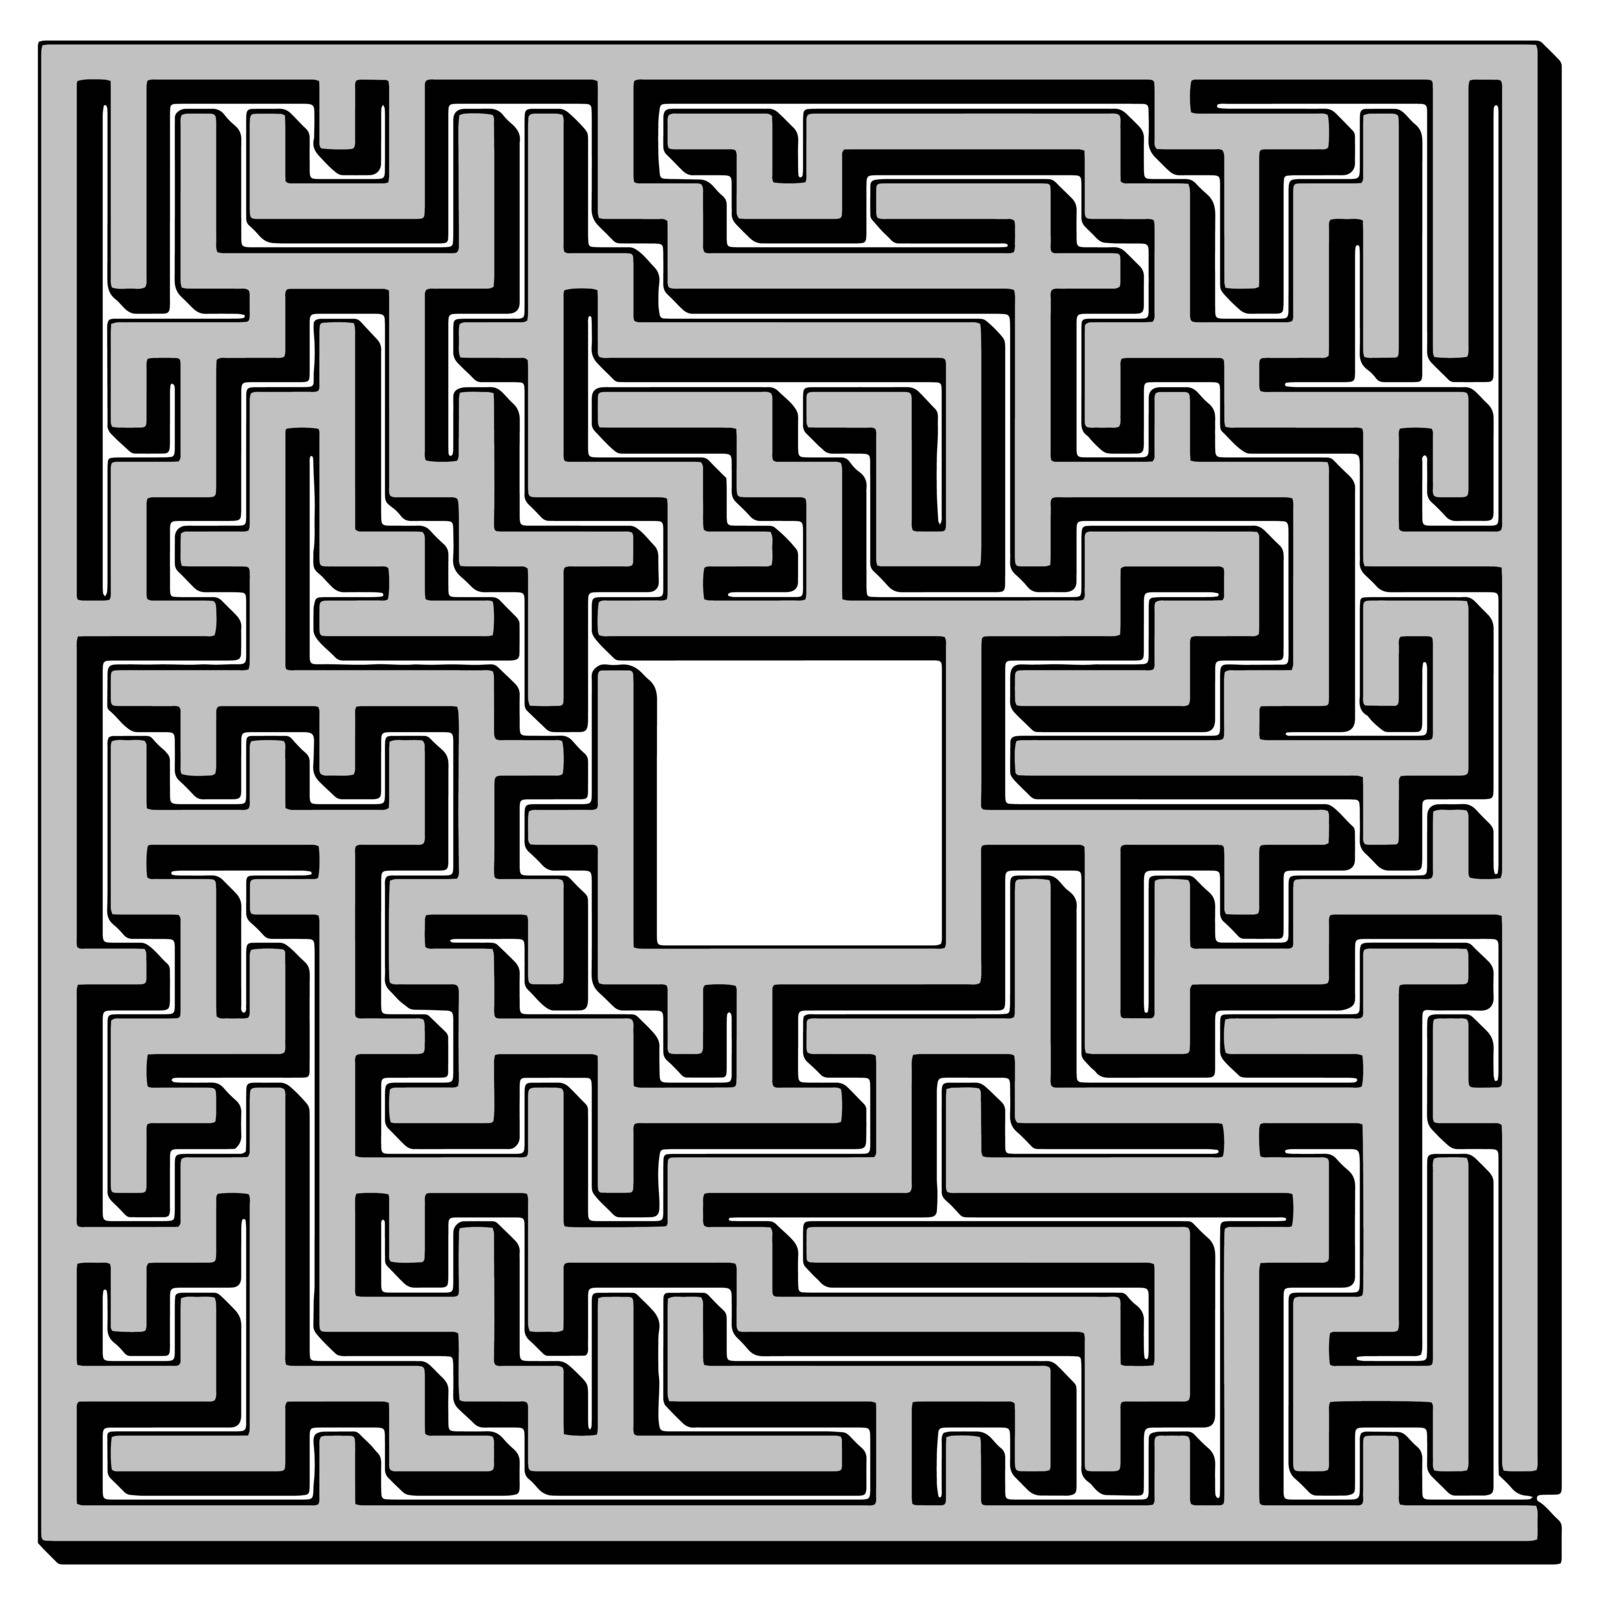 Labyrinth Isolated on White Background. Kids Maze